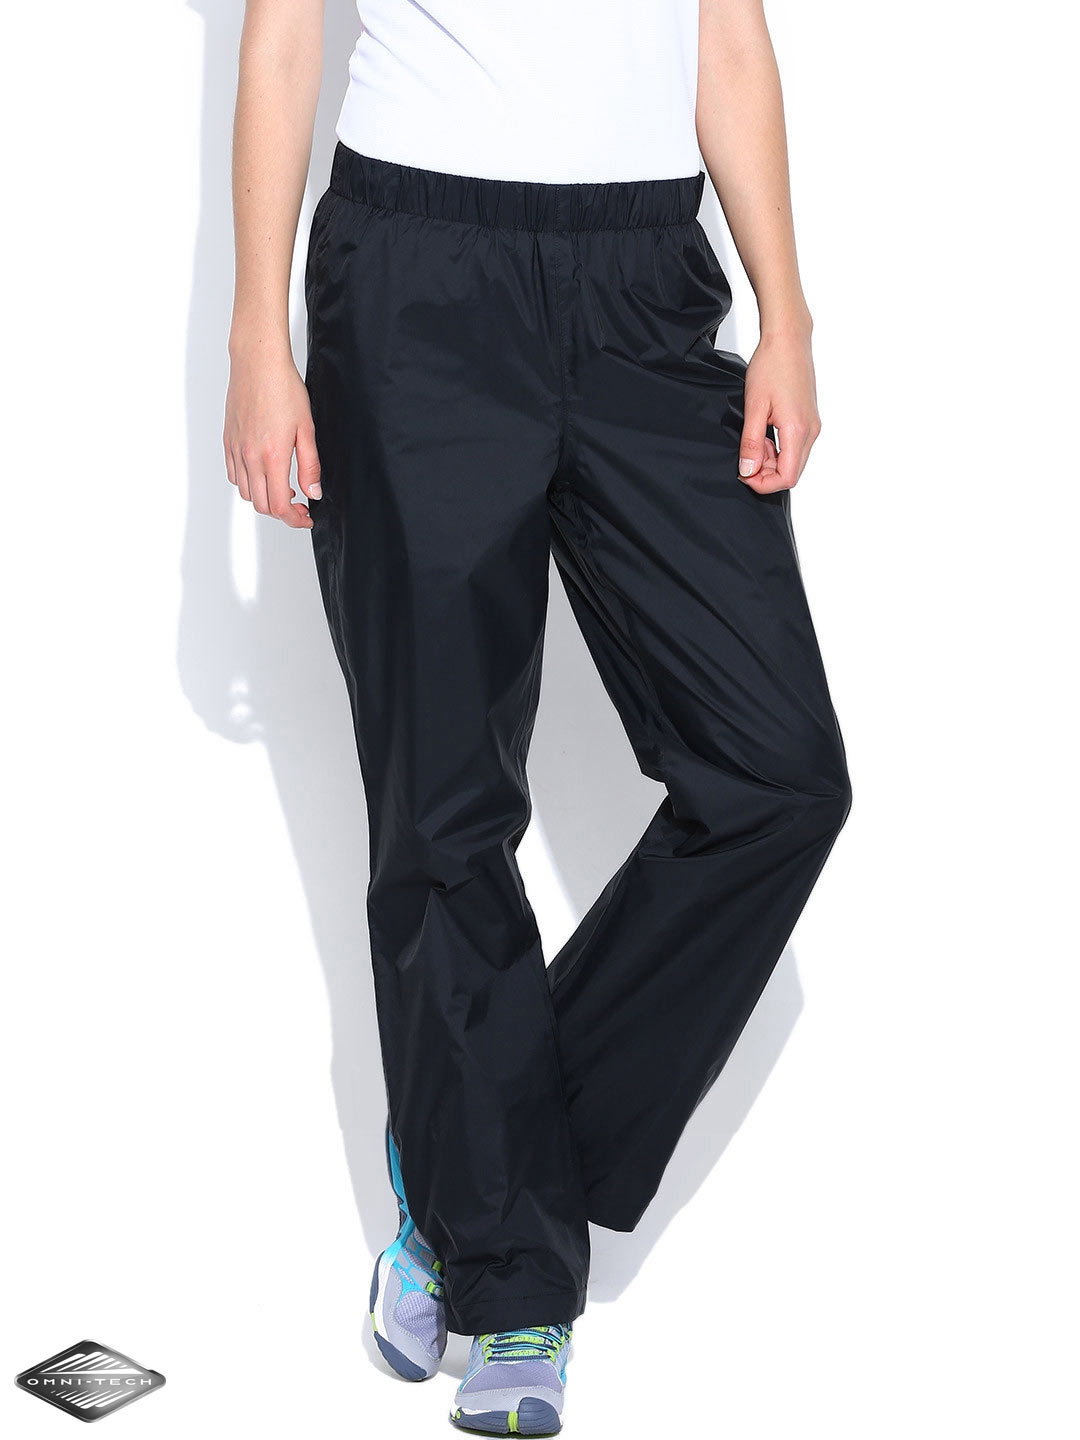 BEST RAIN PANTS FOR WOMEN 5 Rain Pants For Women 2023 Buying Guide   YouTube